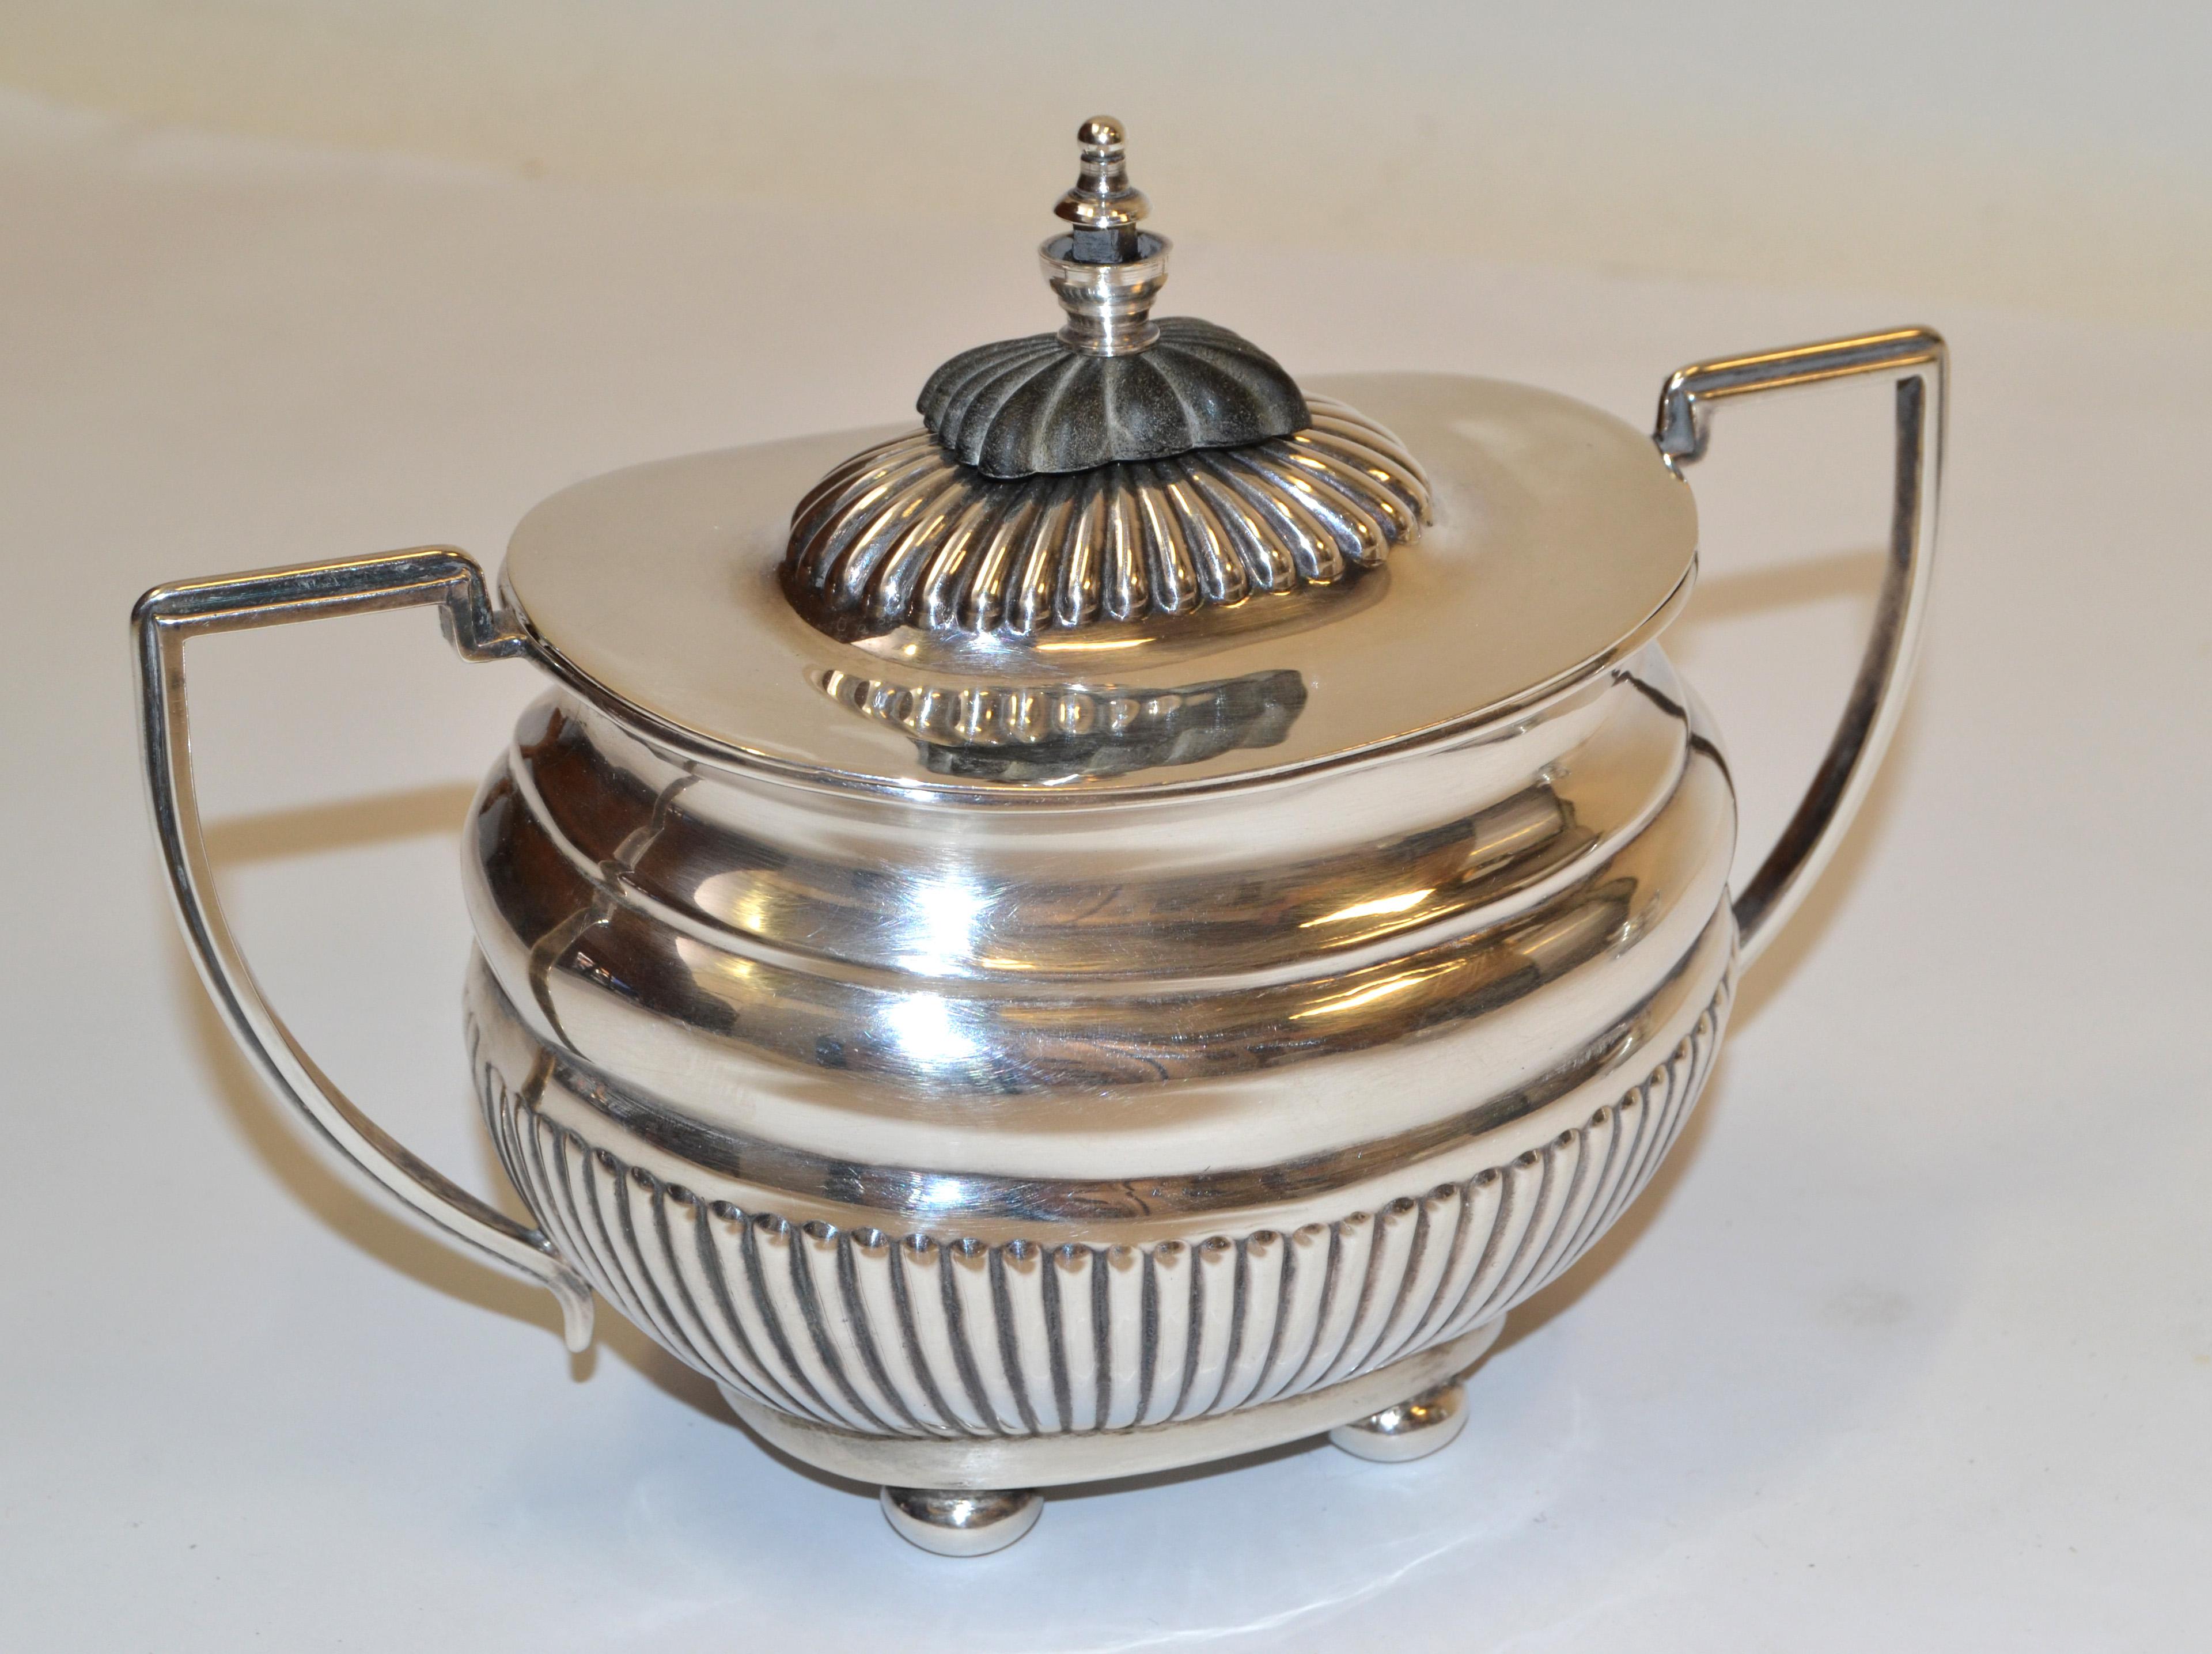 British Colonial Antique 1910 Cheltenham Silver Coffee Service Sheffield England For Sale 2